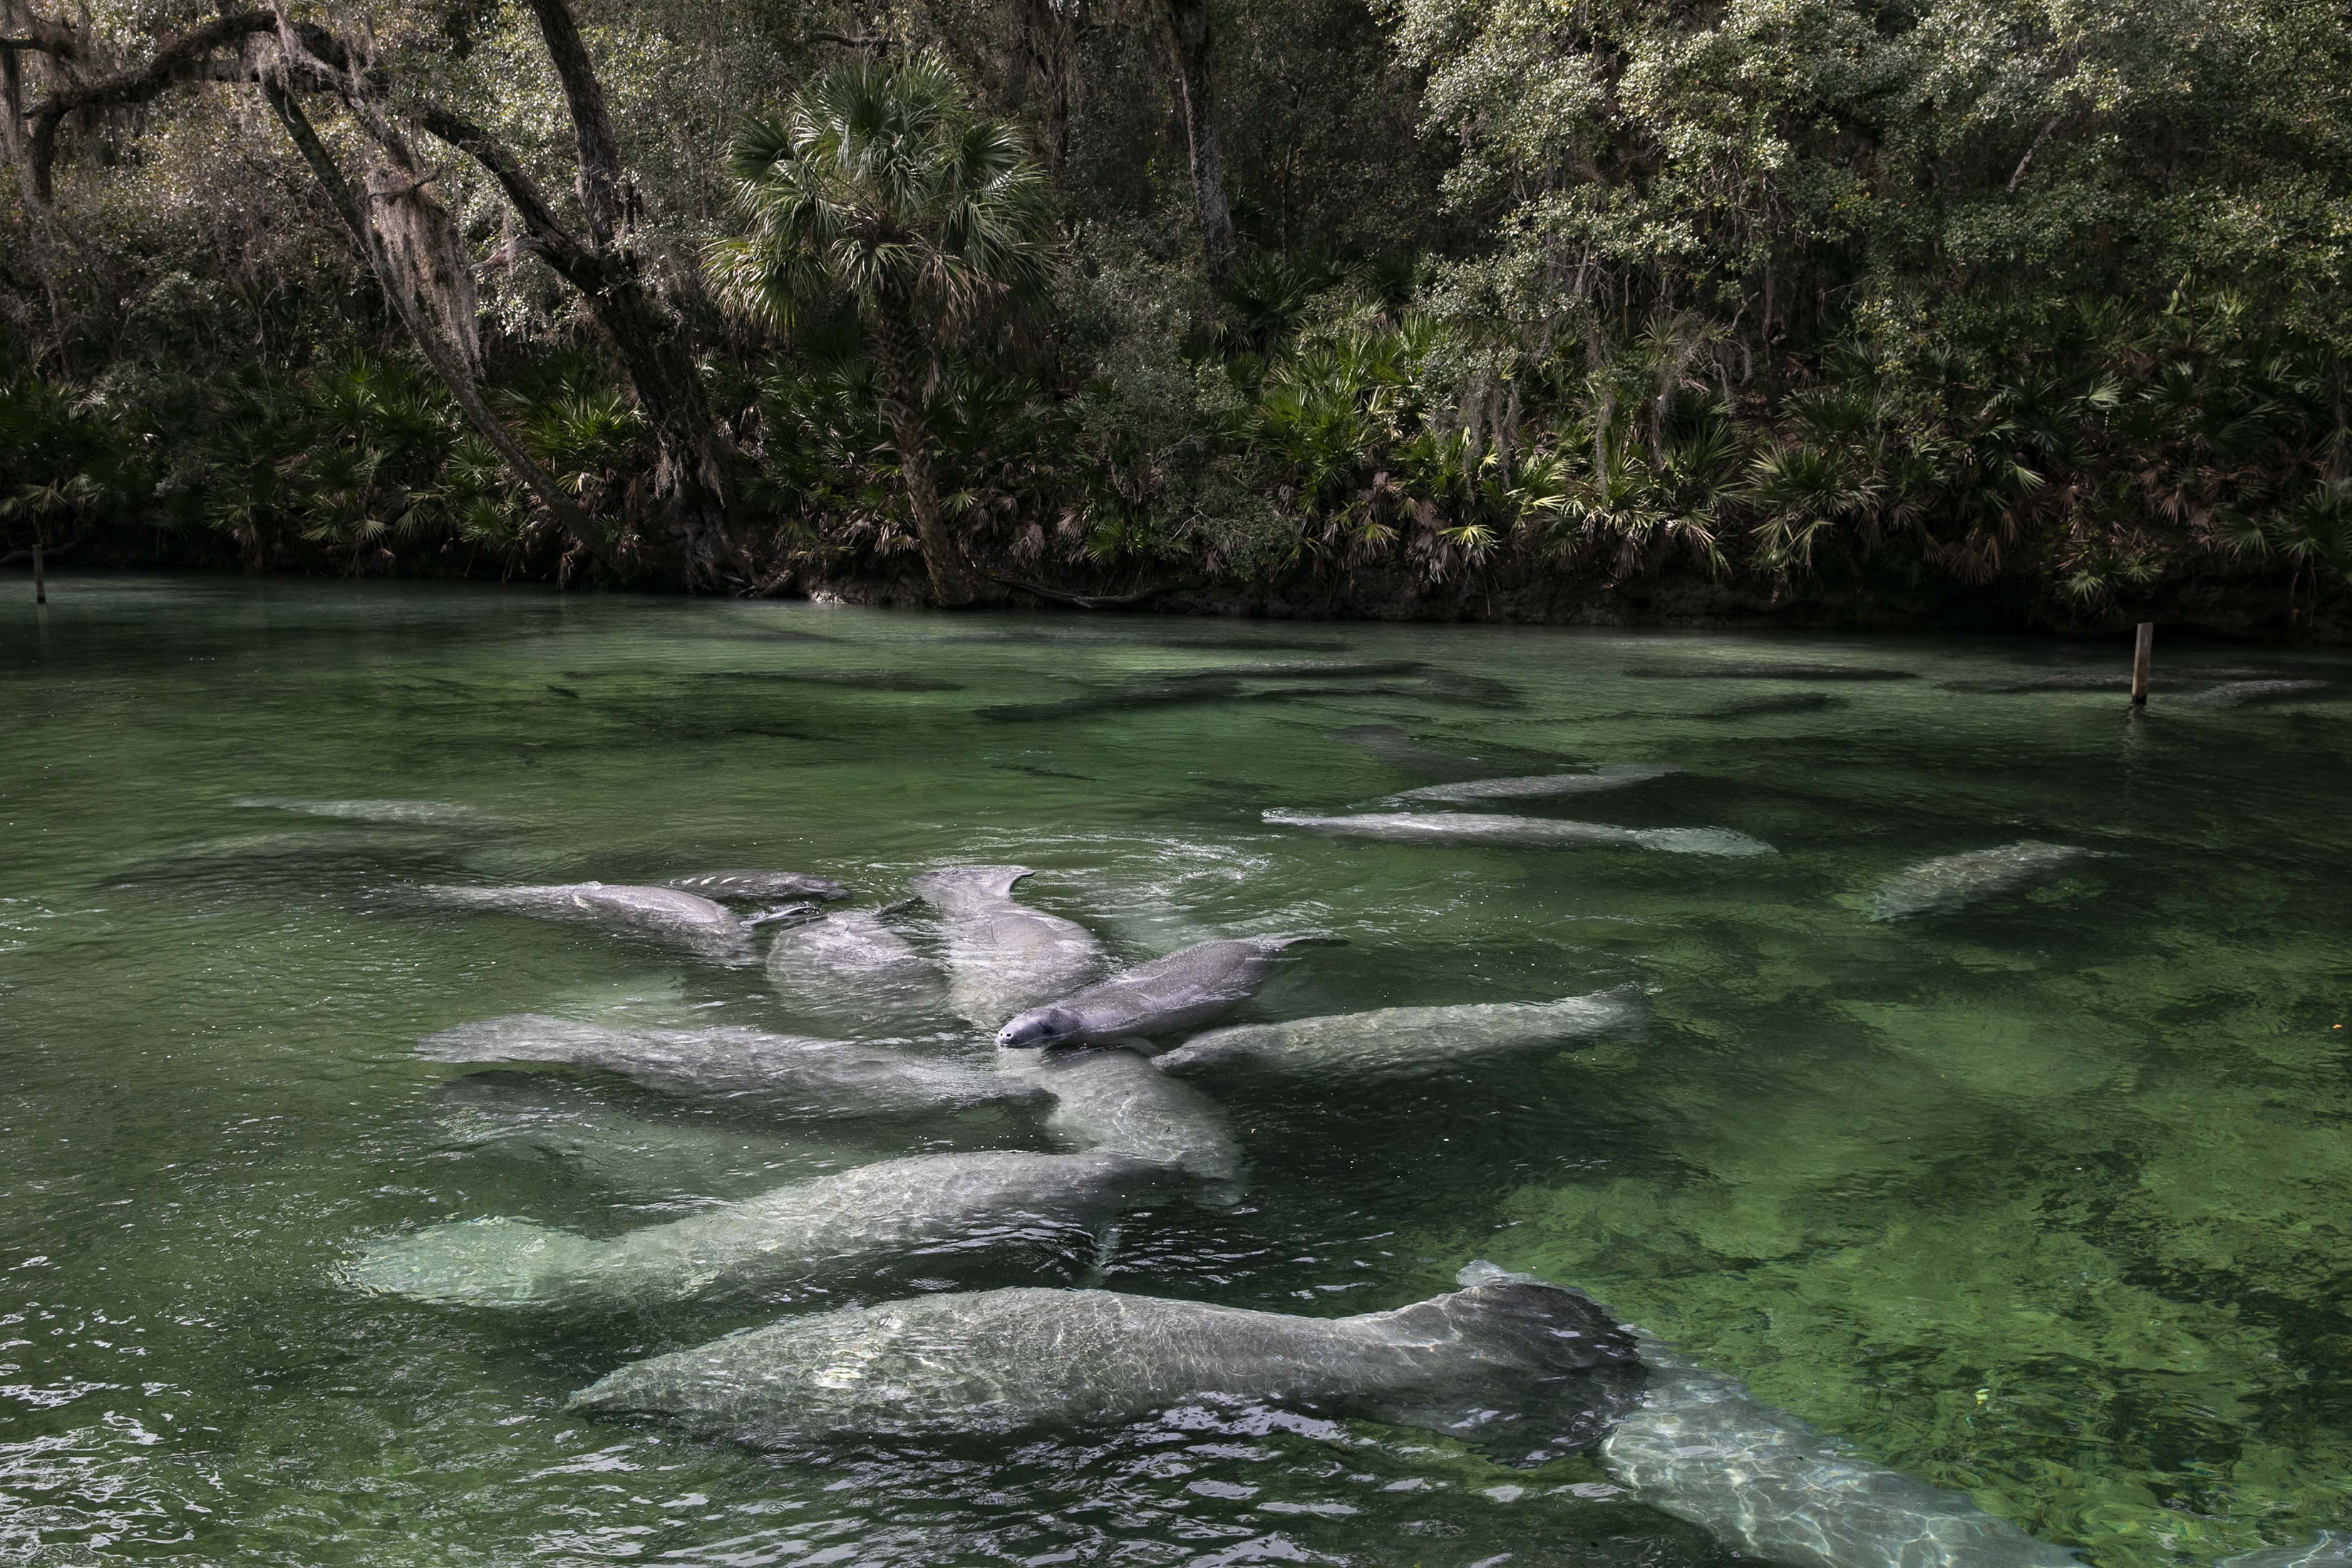 Manatees swim at Blue Spring State Park in Orange City, Florida, on Jan 23, 2022. Pollution has killed the sea grass that manatees feed on, and they are starving to death in large numbers. Extraordinary intervention may not be enough to protect them. 